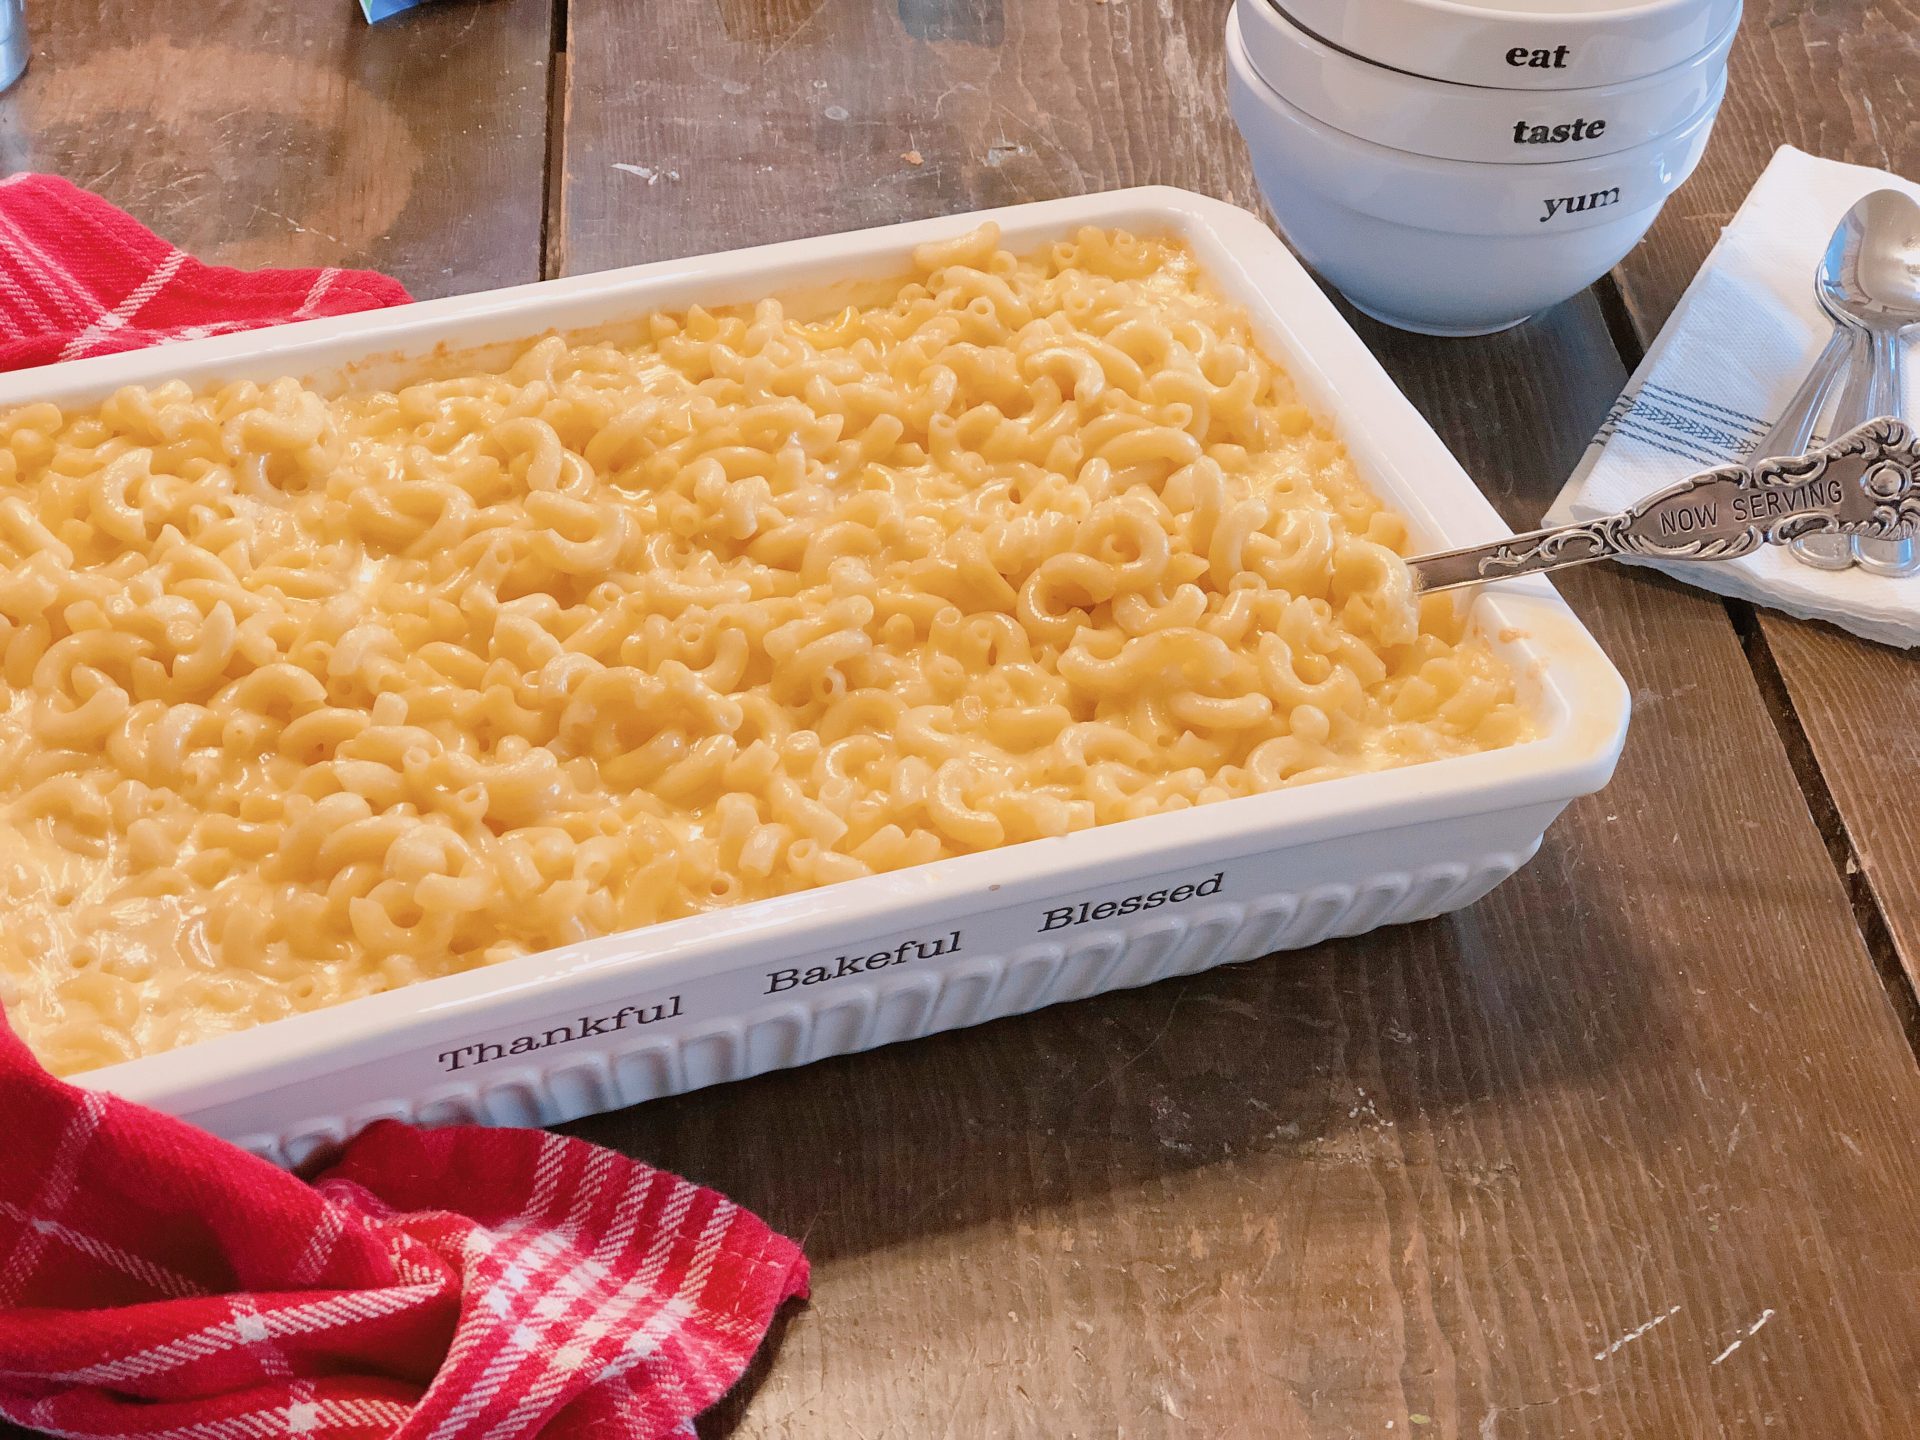 Almost Award Winning Mac and Cheese from Farmwife Feeds is a classic oven macaroni and cheese recipe that is creamy and delicious. #recipe #macandcheese #cheese #classic